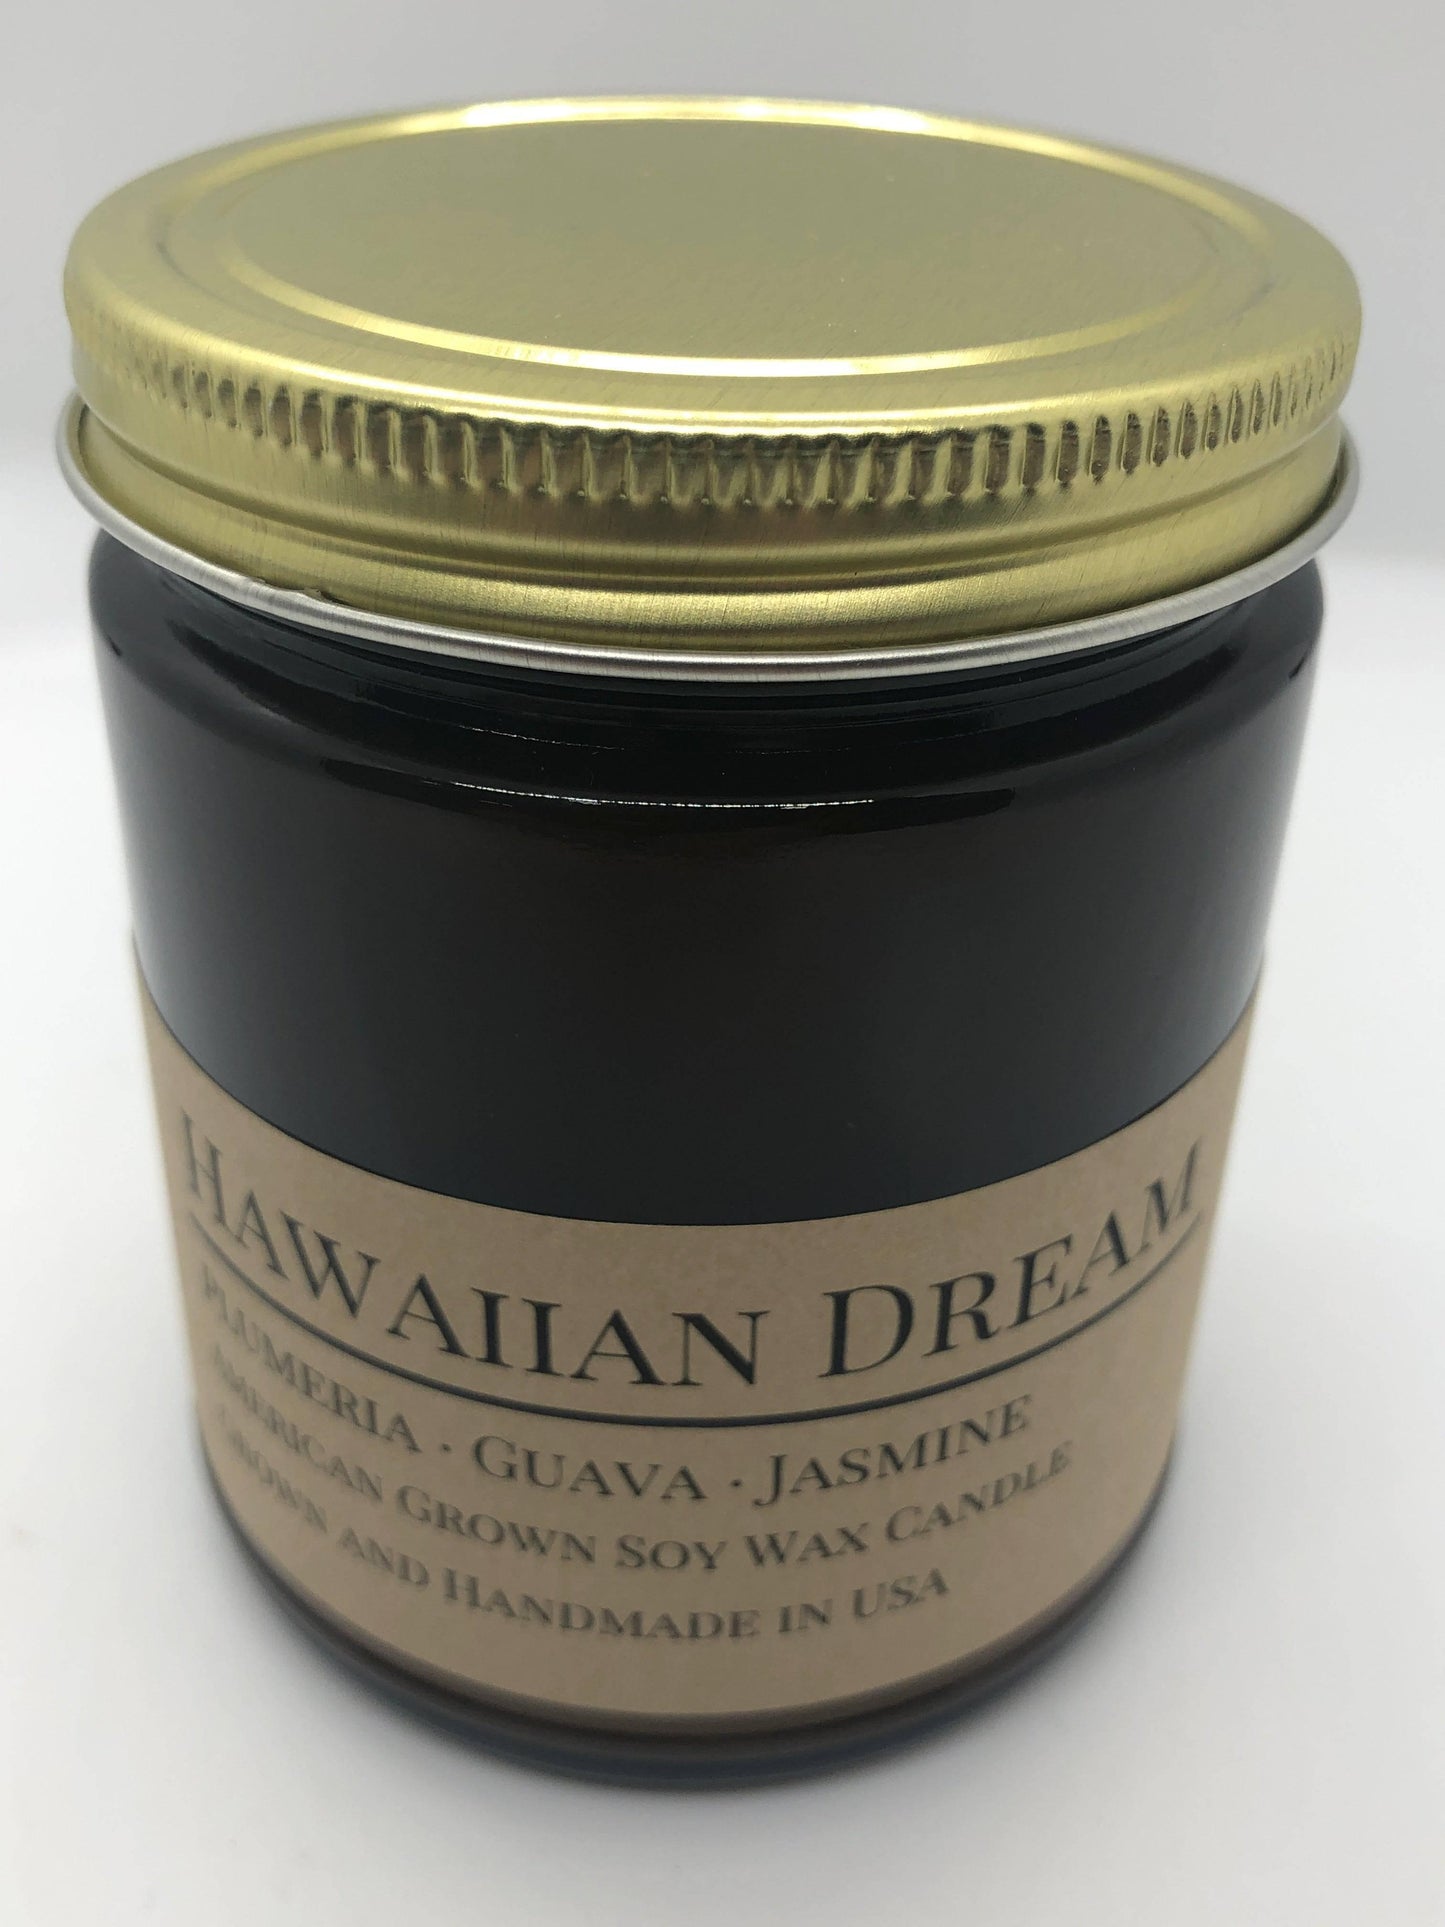 hawaiian dream soy wax candle | 9 oz amber apothecary jar by prairie fire tallow, candles, and lavender